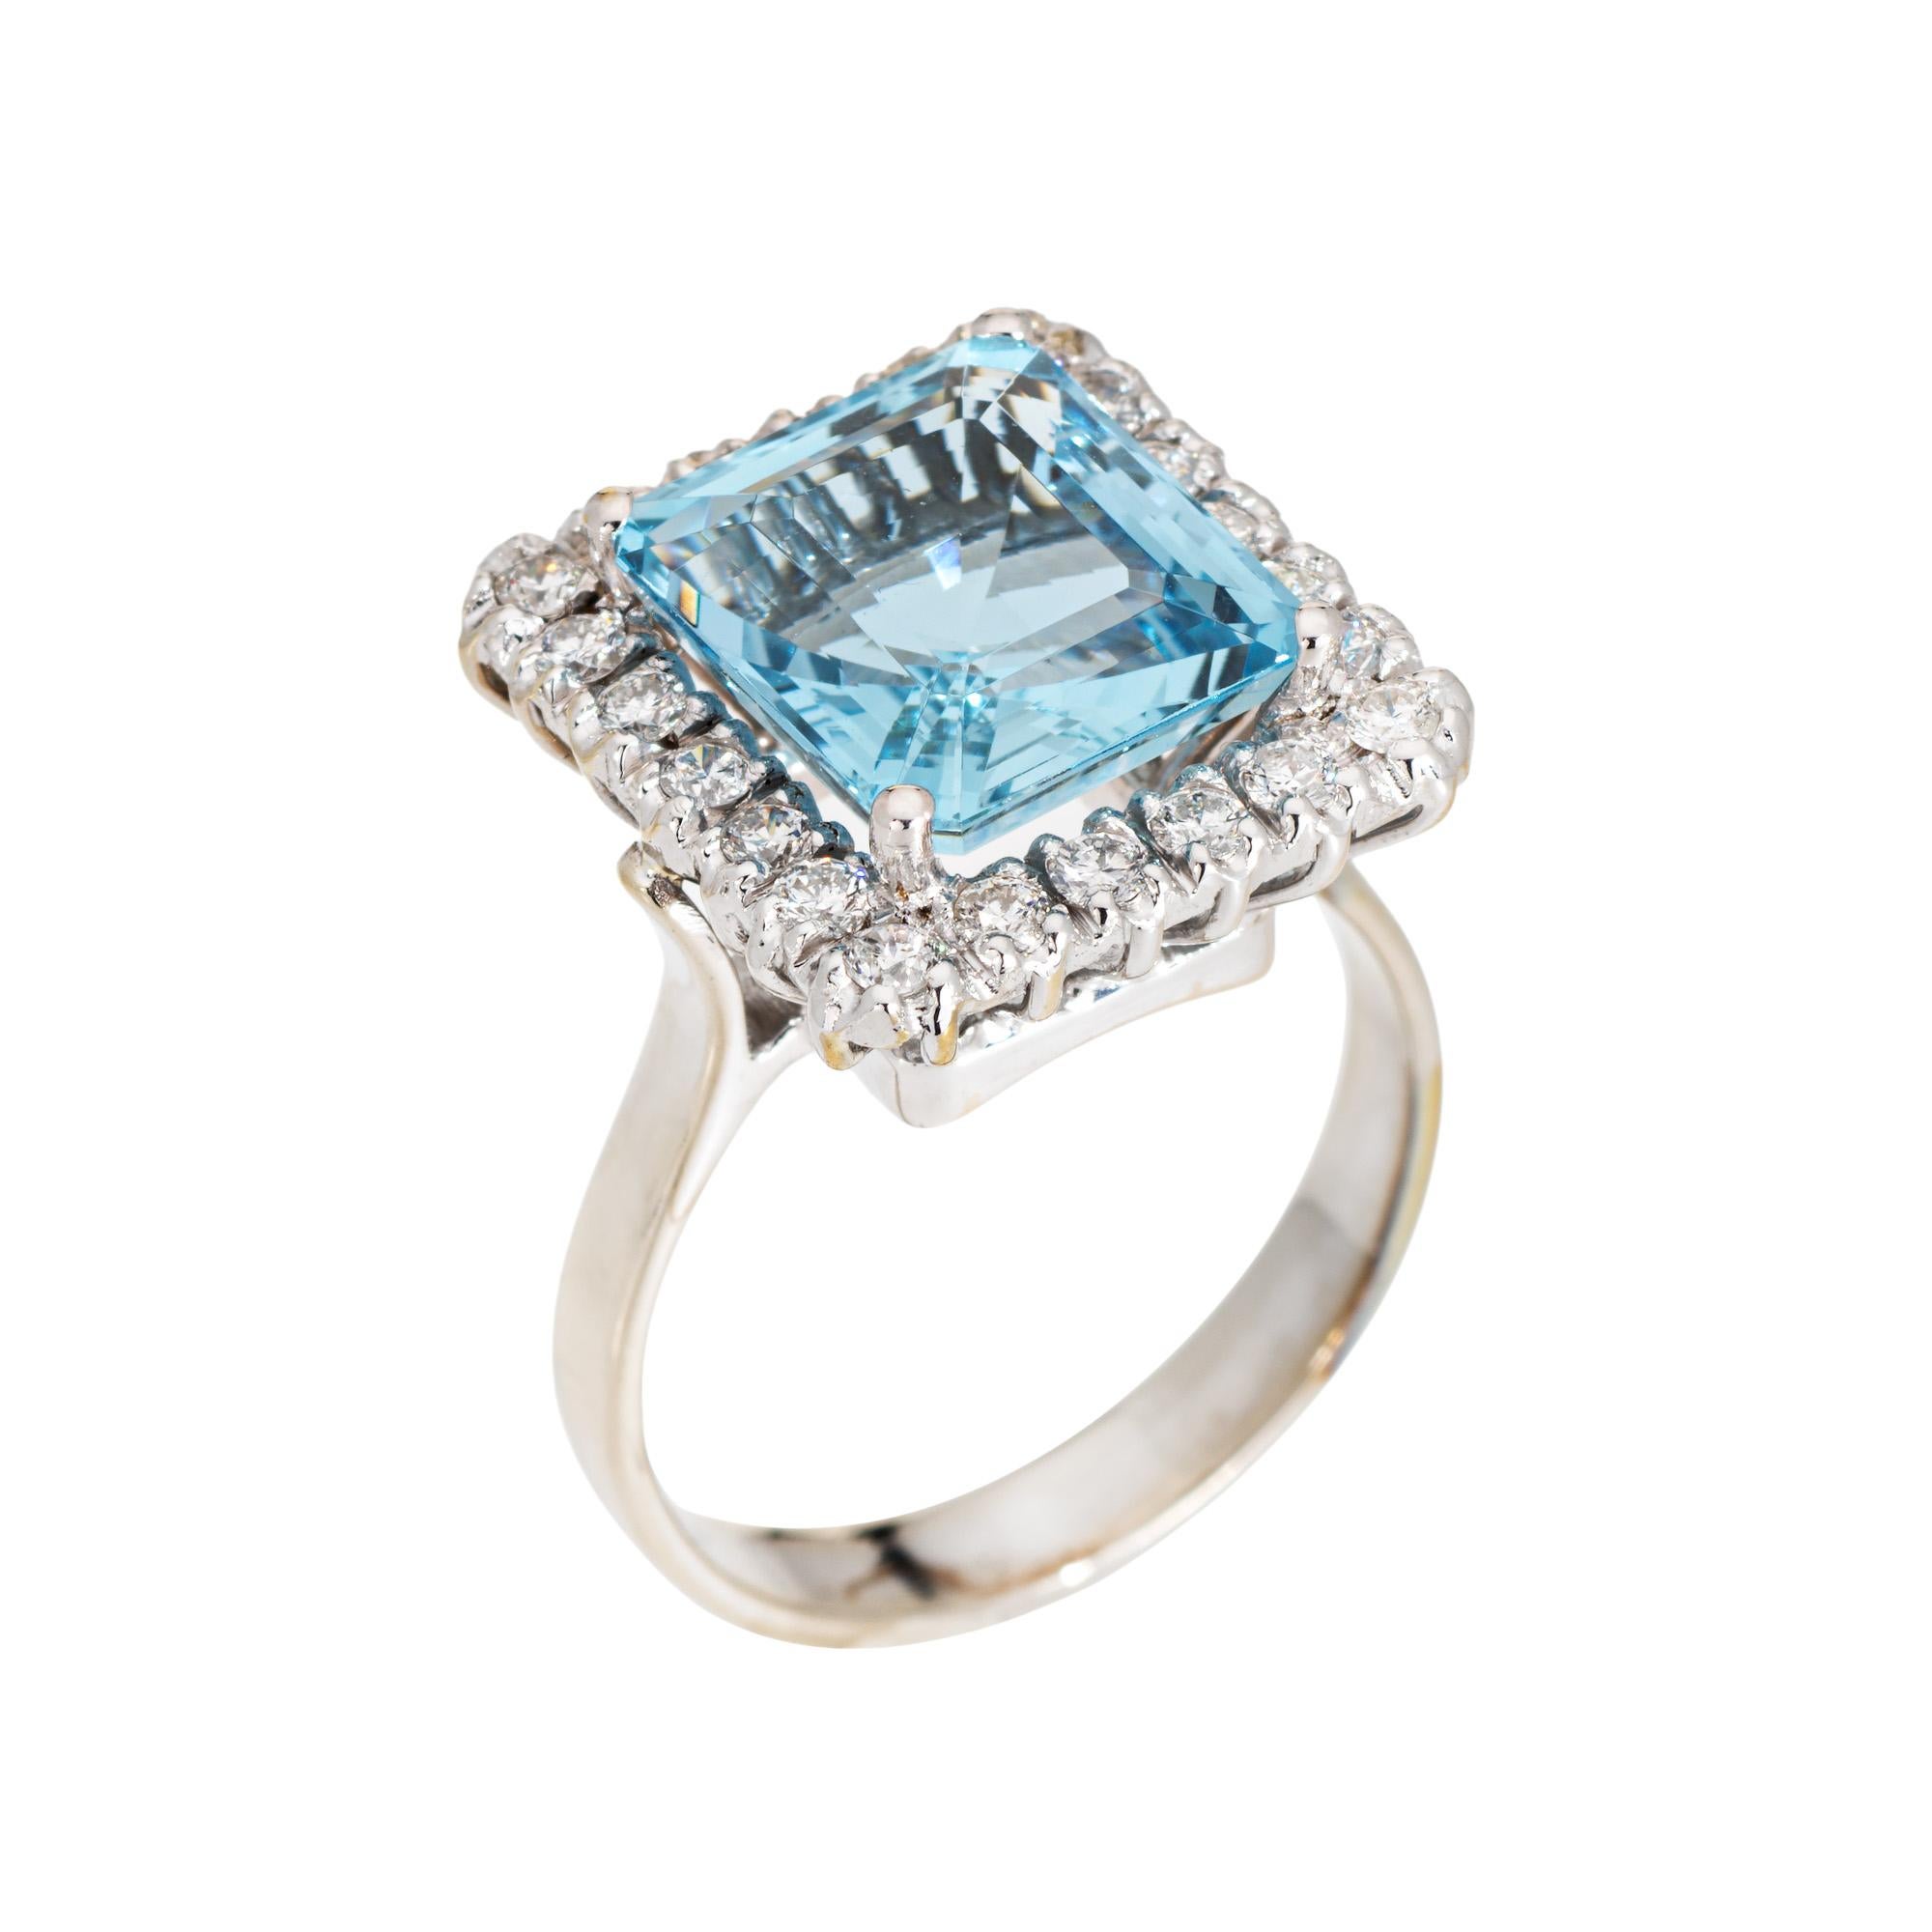 Stylish and finely detailed aquamarine & diamond ring crafted in 18 karat white gold (circa 1970s to 1980s).

Emerald cut aquamarine measures 11.9 x 10.5 x 6.5mm (estimated at 5.35 carats). Diamonds total an estimated 0.65 carats (estimated at H-I